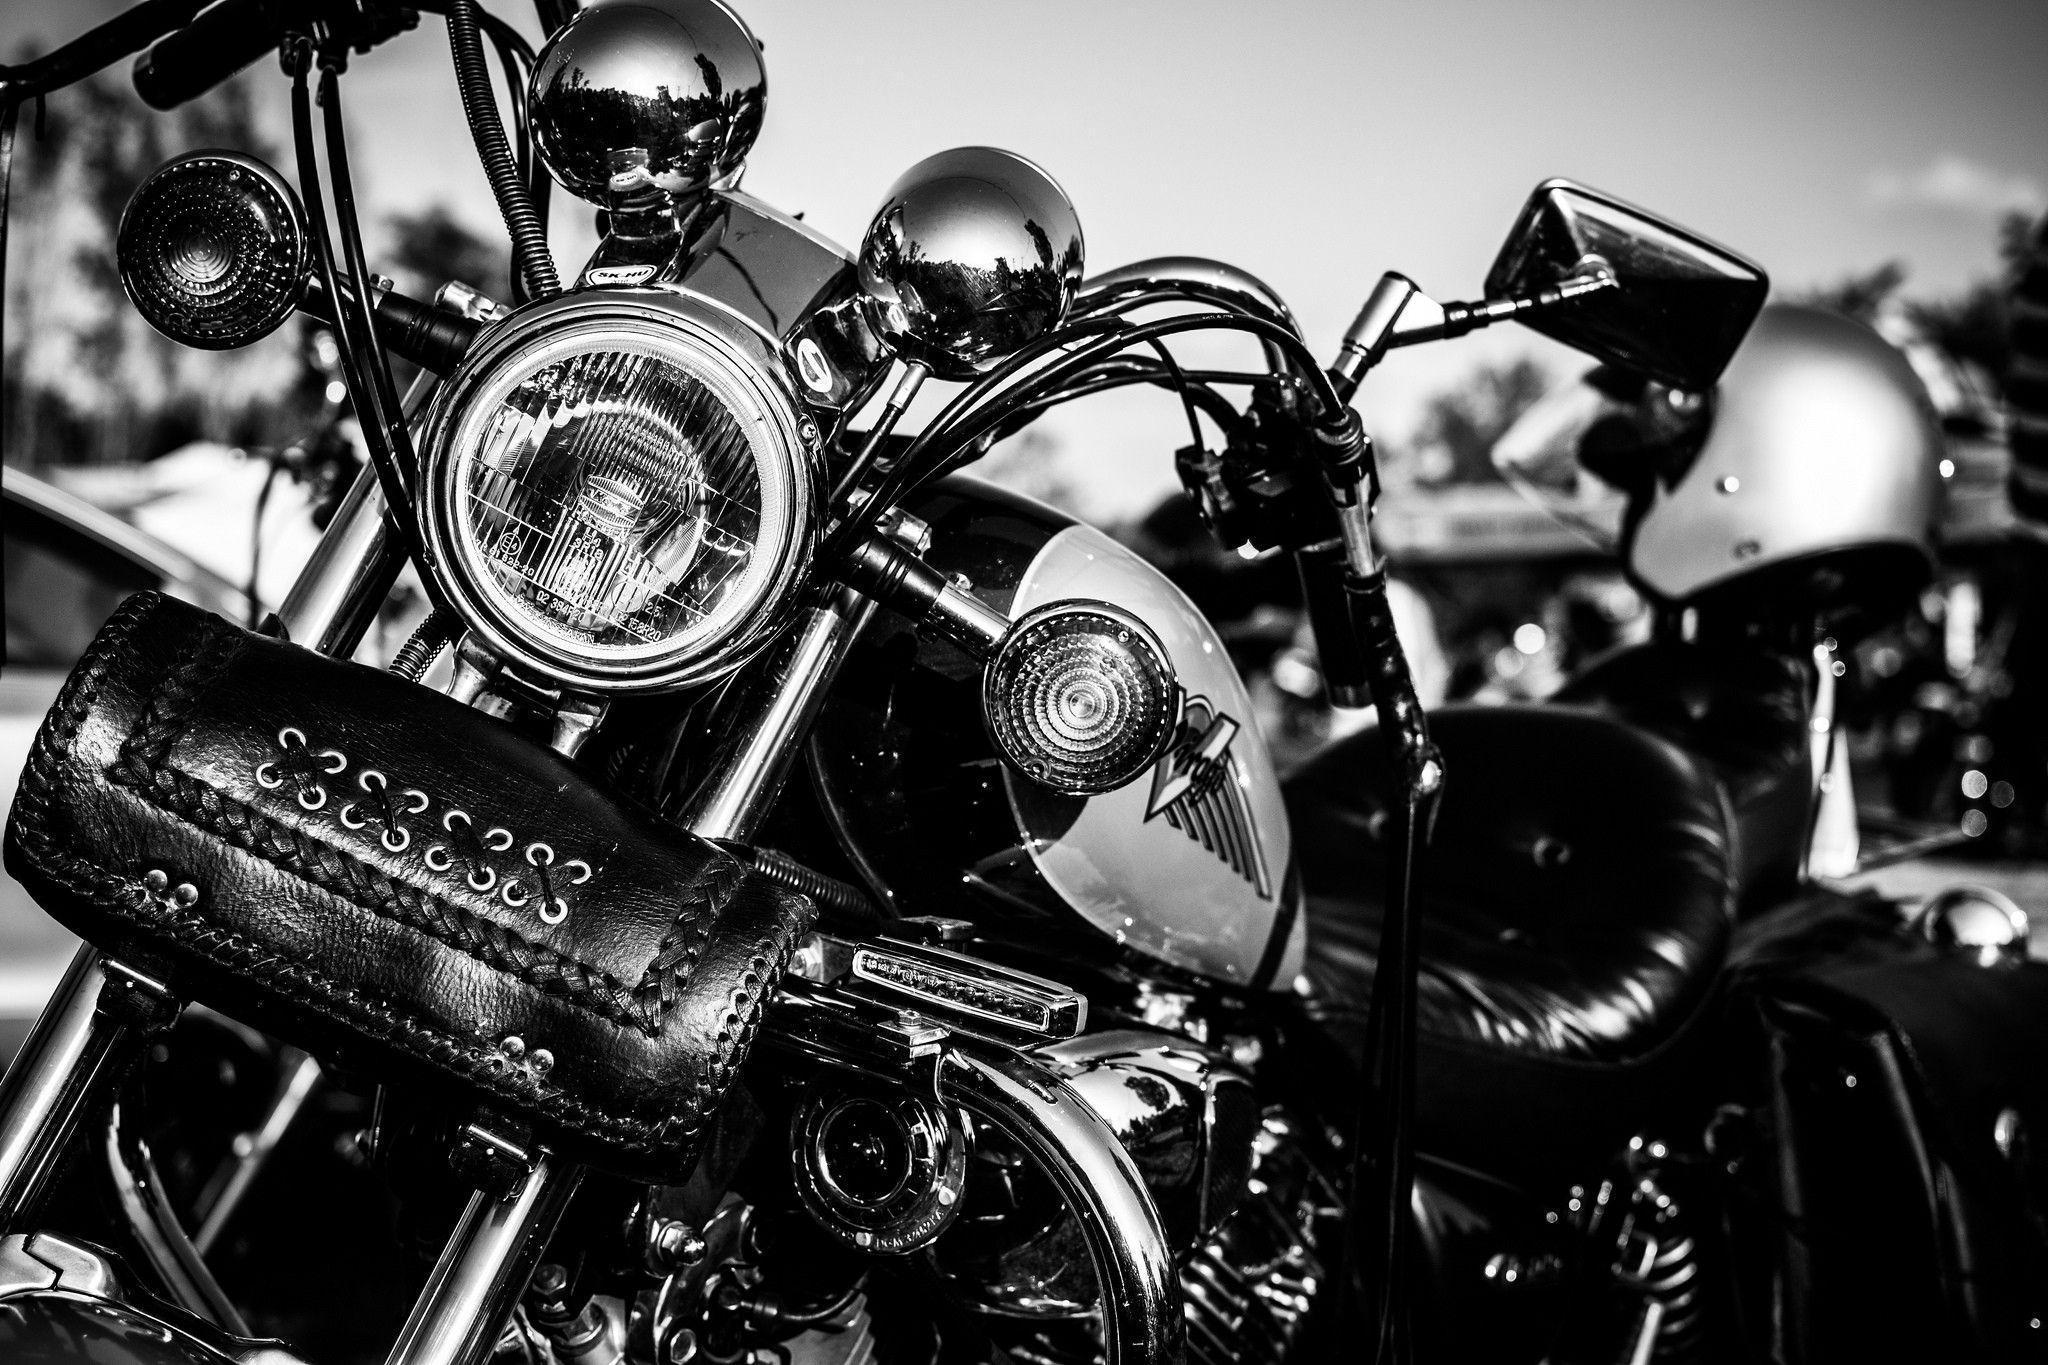 Harley Motorcycles Wallpaper Backgrounds 1 HD Wallpapers